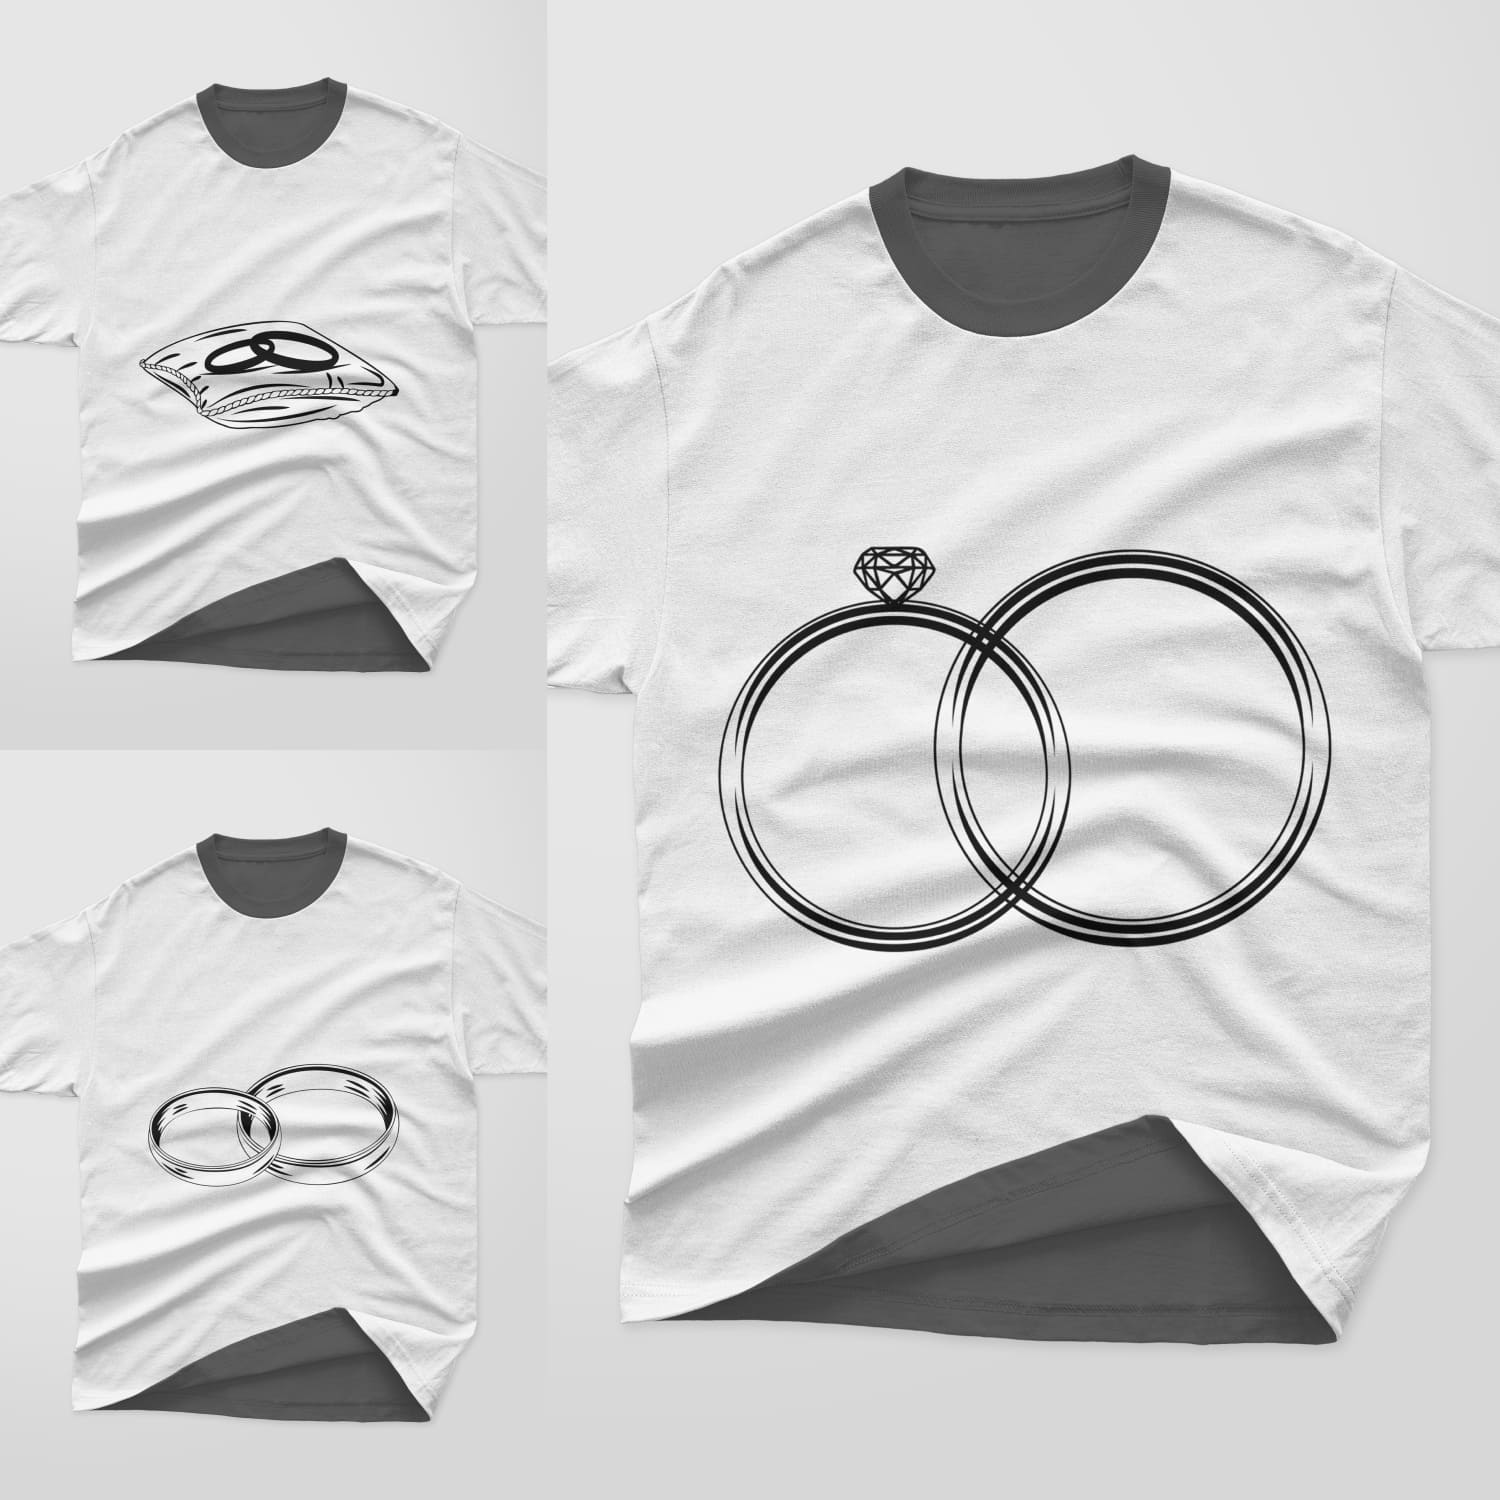 A pack of images of t-shirts with a beautiful print of engagement rings.